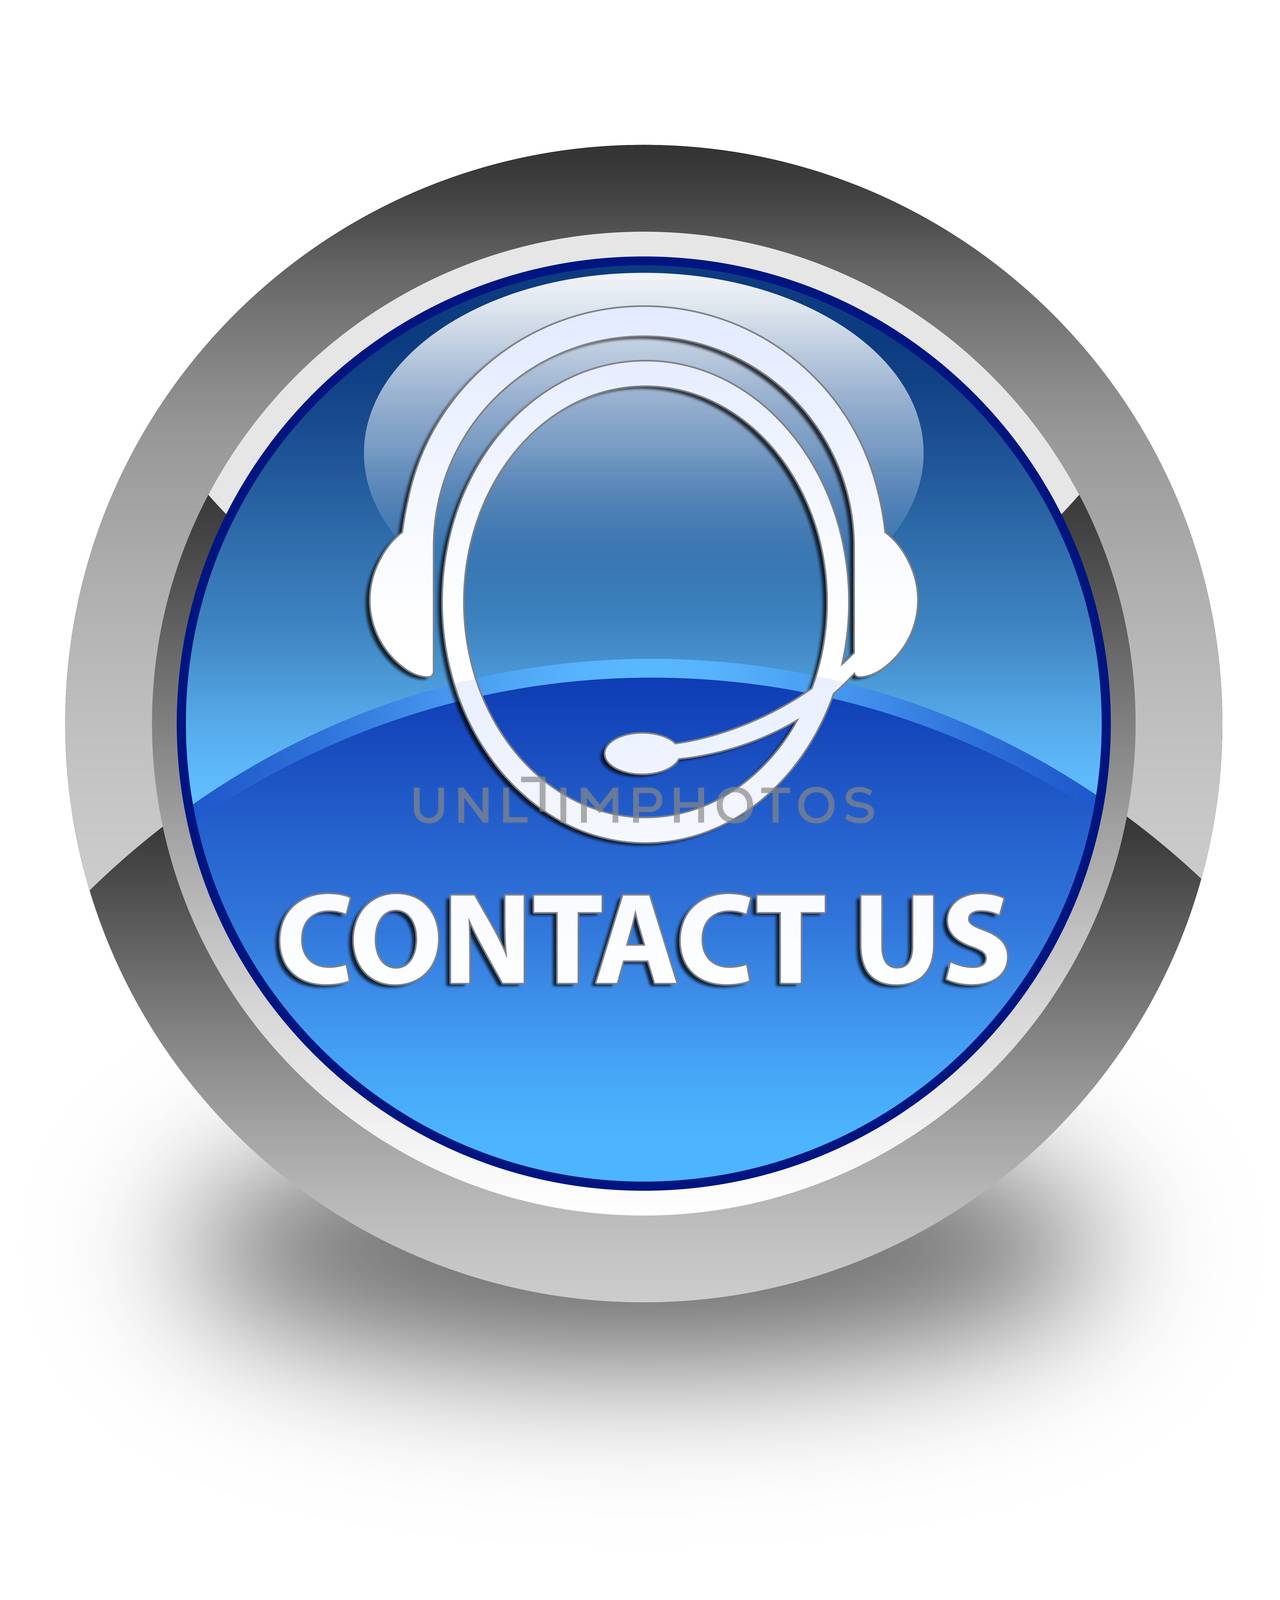 Contact us (customer care icon) glossy blue round button by faysalfarhan